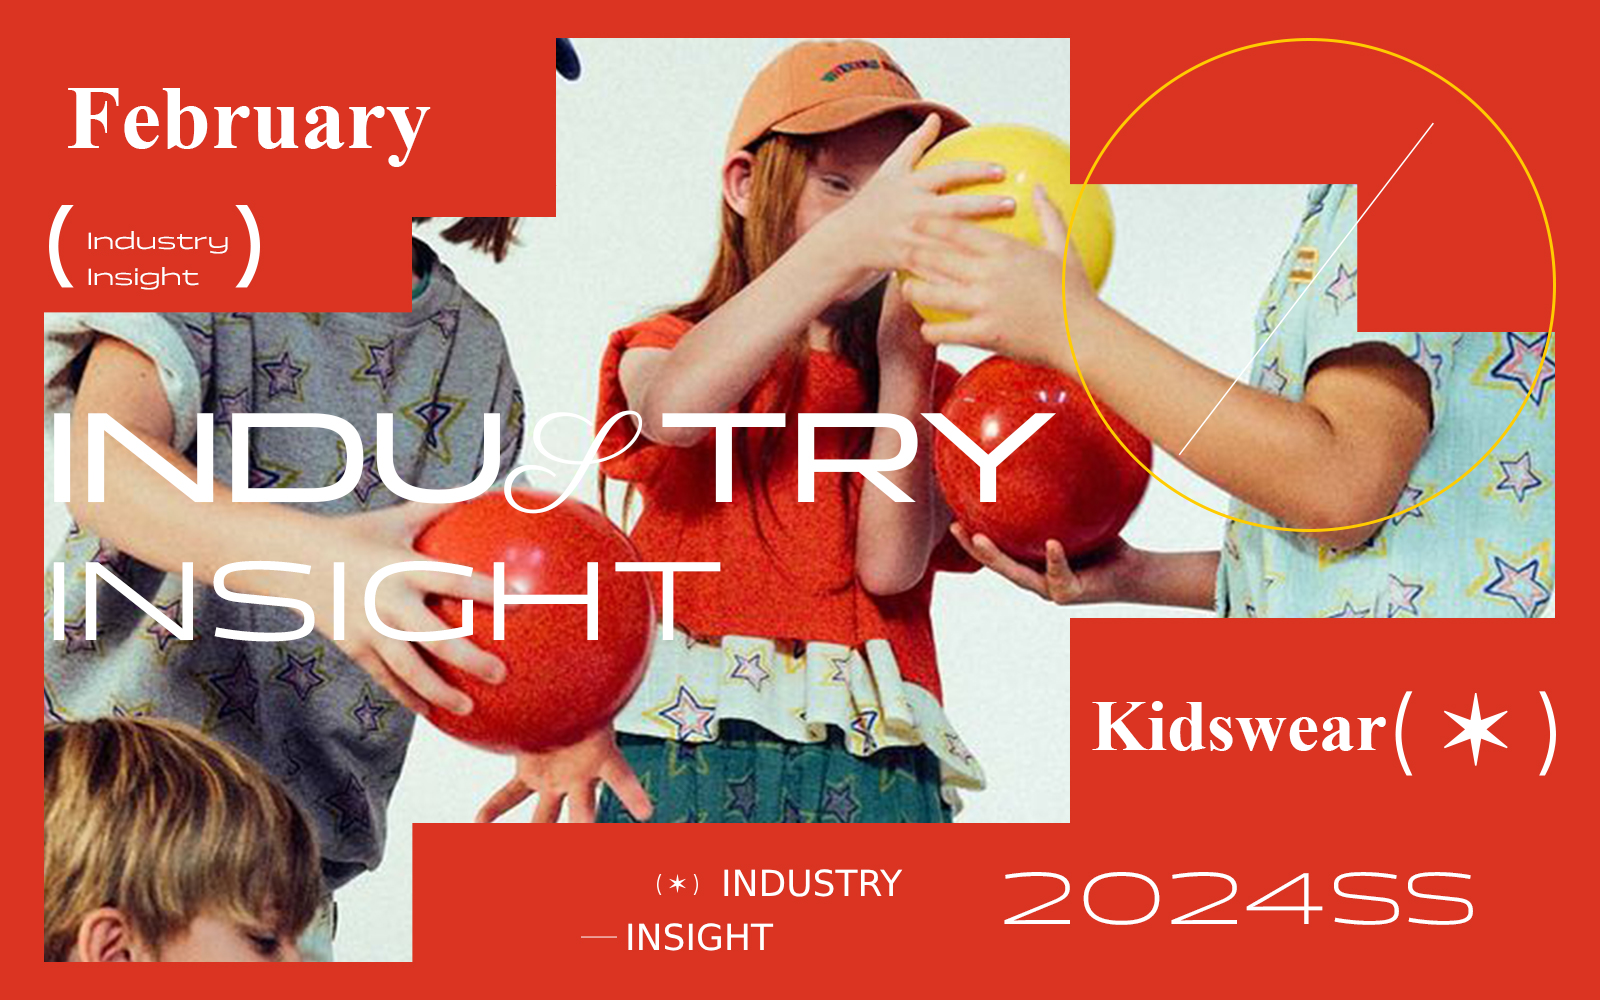 February 2024 -- The Industry Insight of Kidswear